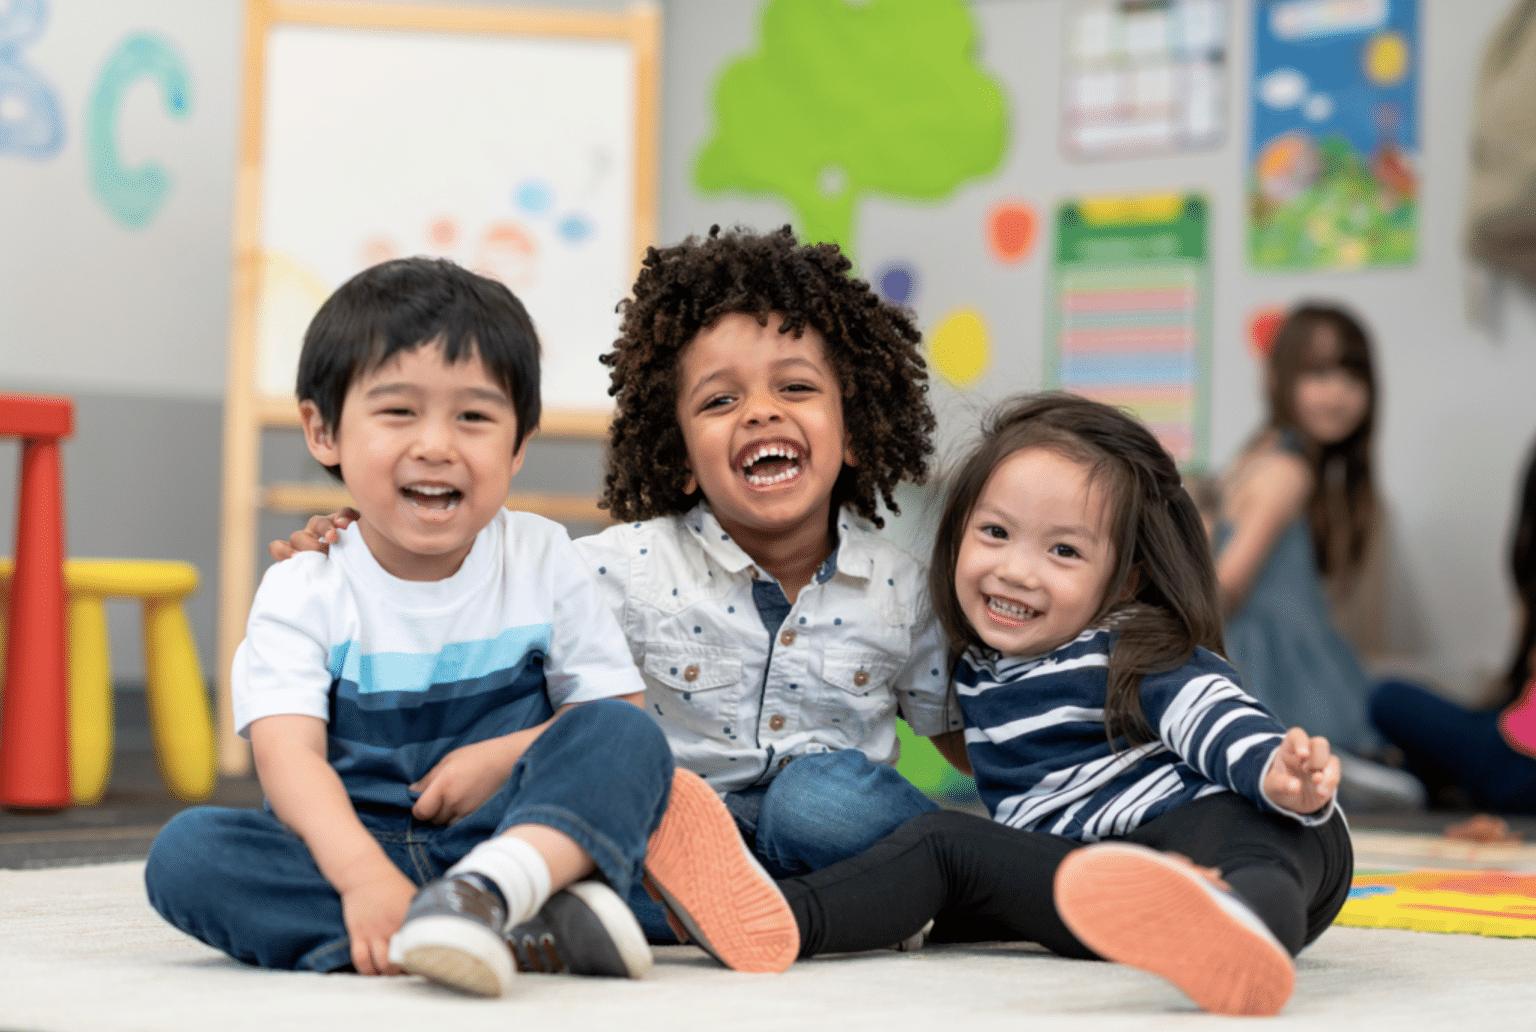 three toddlers smile in a brightly colored classroom